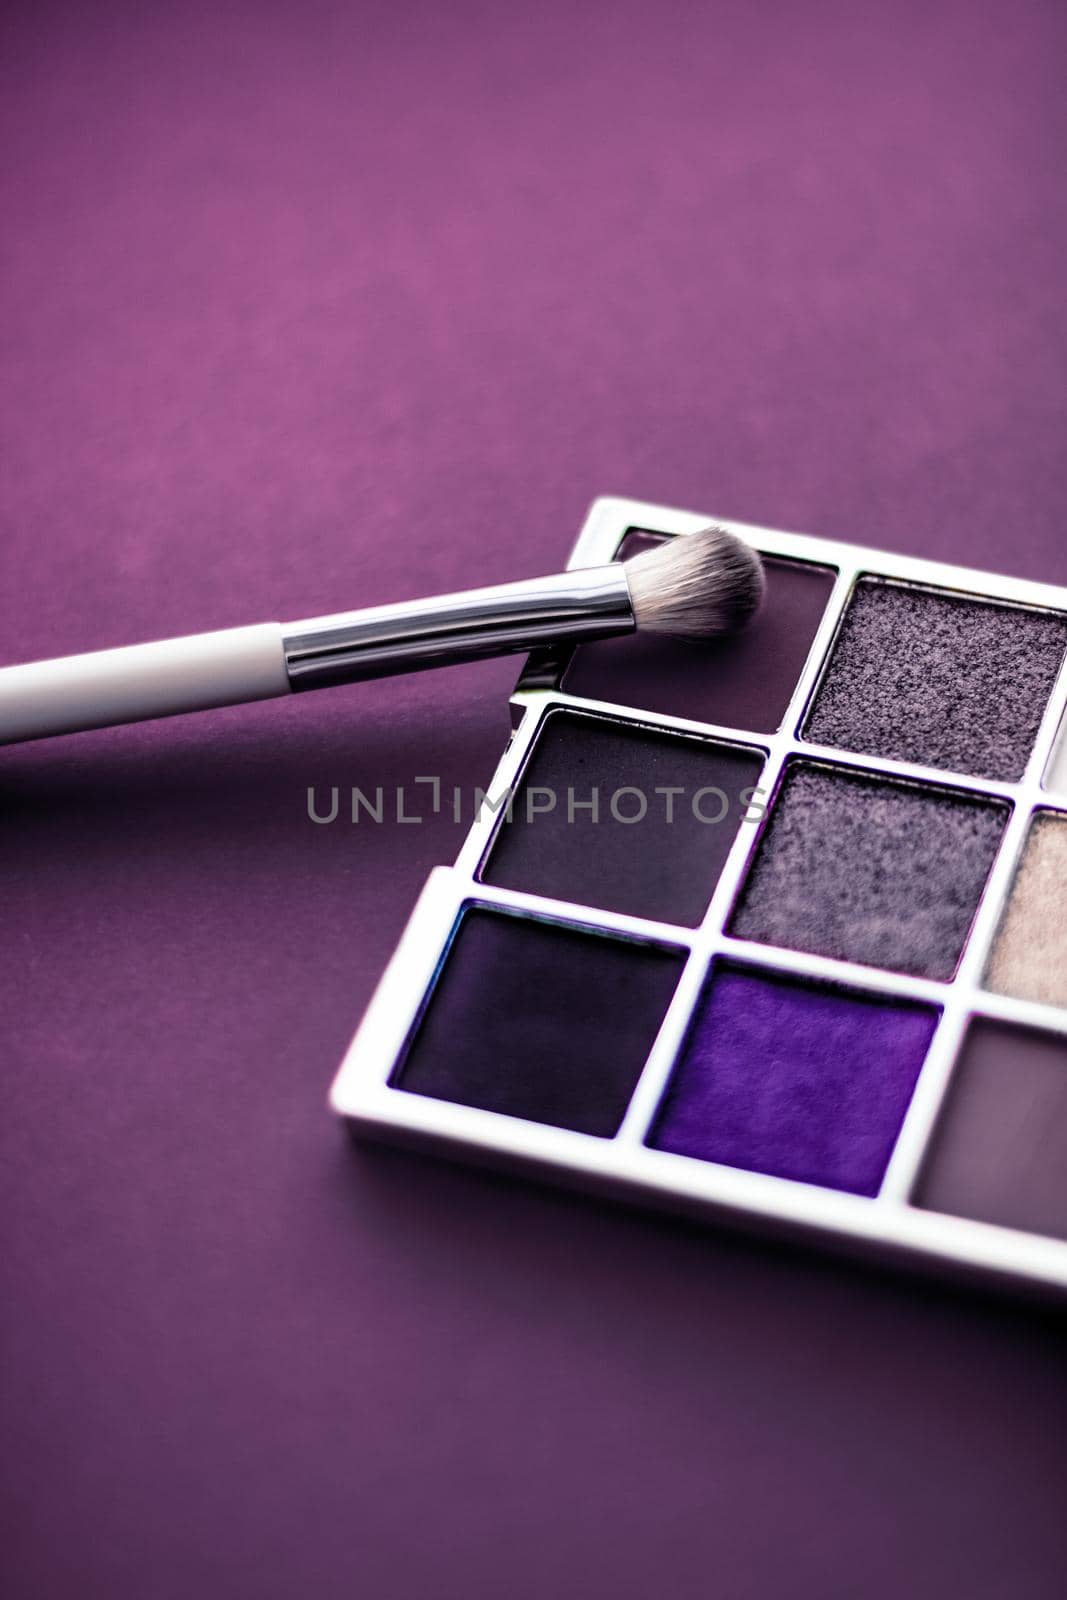 Eyeshadow palette and make-up brush on purple background, eye shadows cosmetics product as luxury beauty brand promotion and holiday fashion blog design by Anneleven